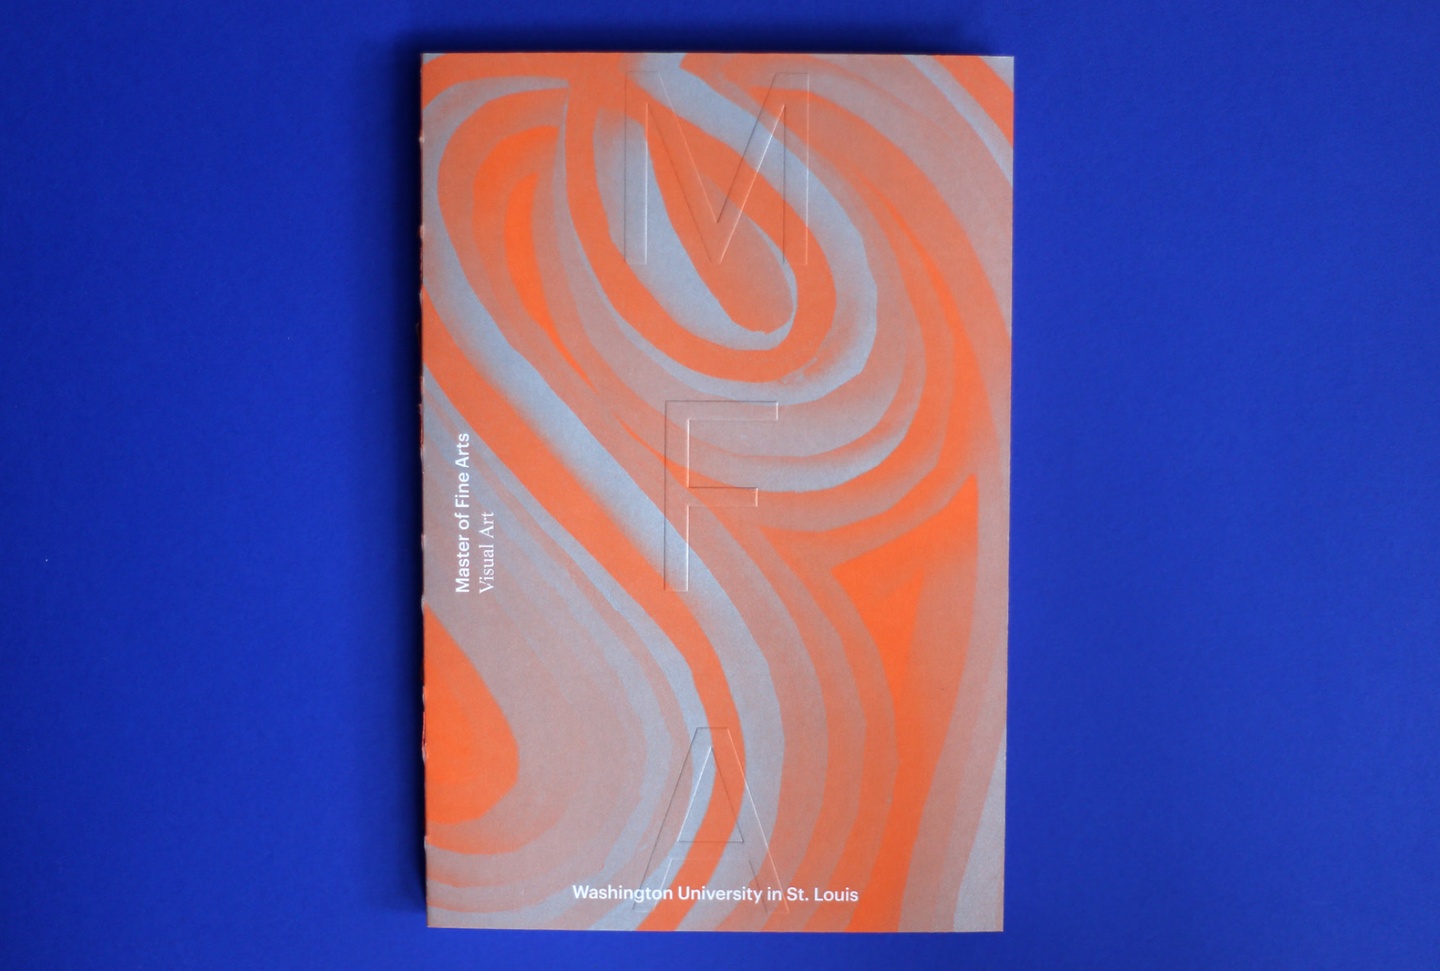 Orange and silver book photographed on a deep ultramarine background. The cover features an abstract, curved pattern with the letters "MFA" embossed in the center. Smaller text, in white, reads "Master of Fine Arts" — "Visual Arts" — "Washington University in St. Louis".